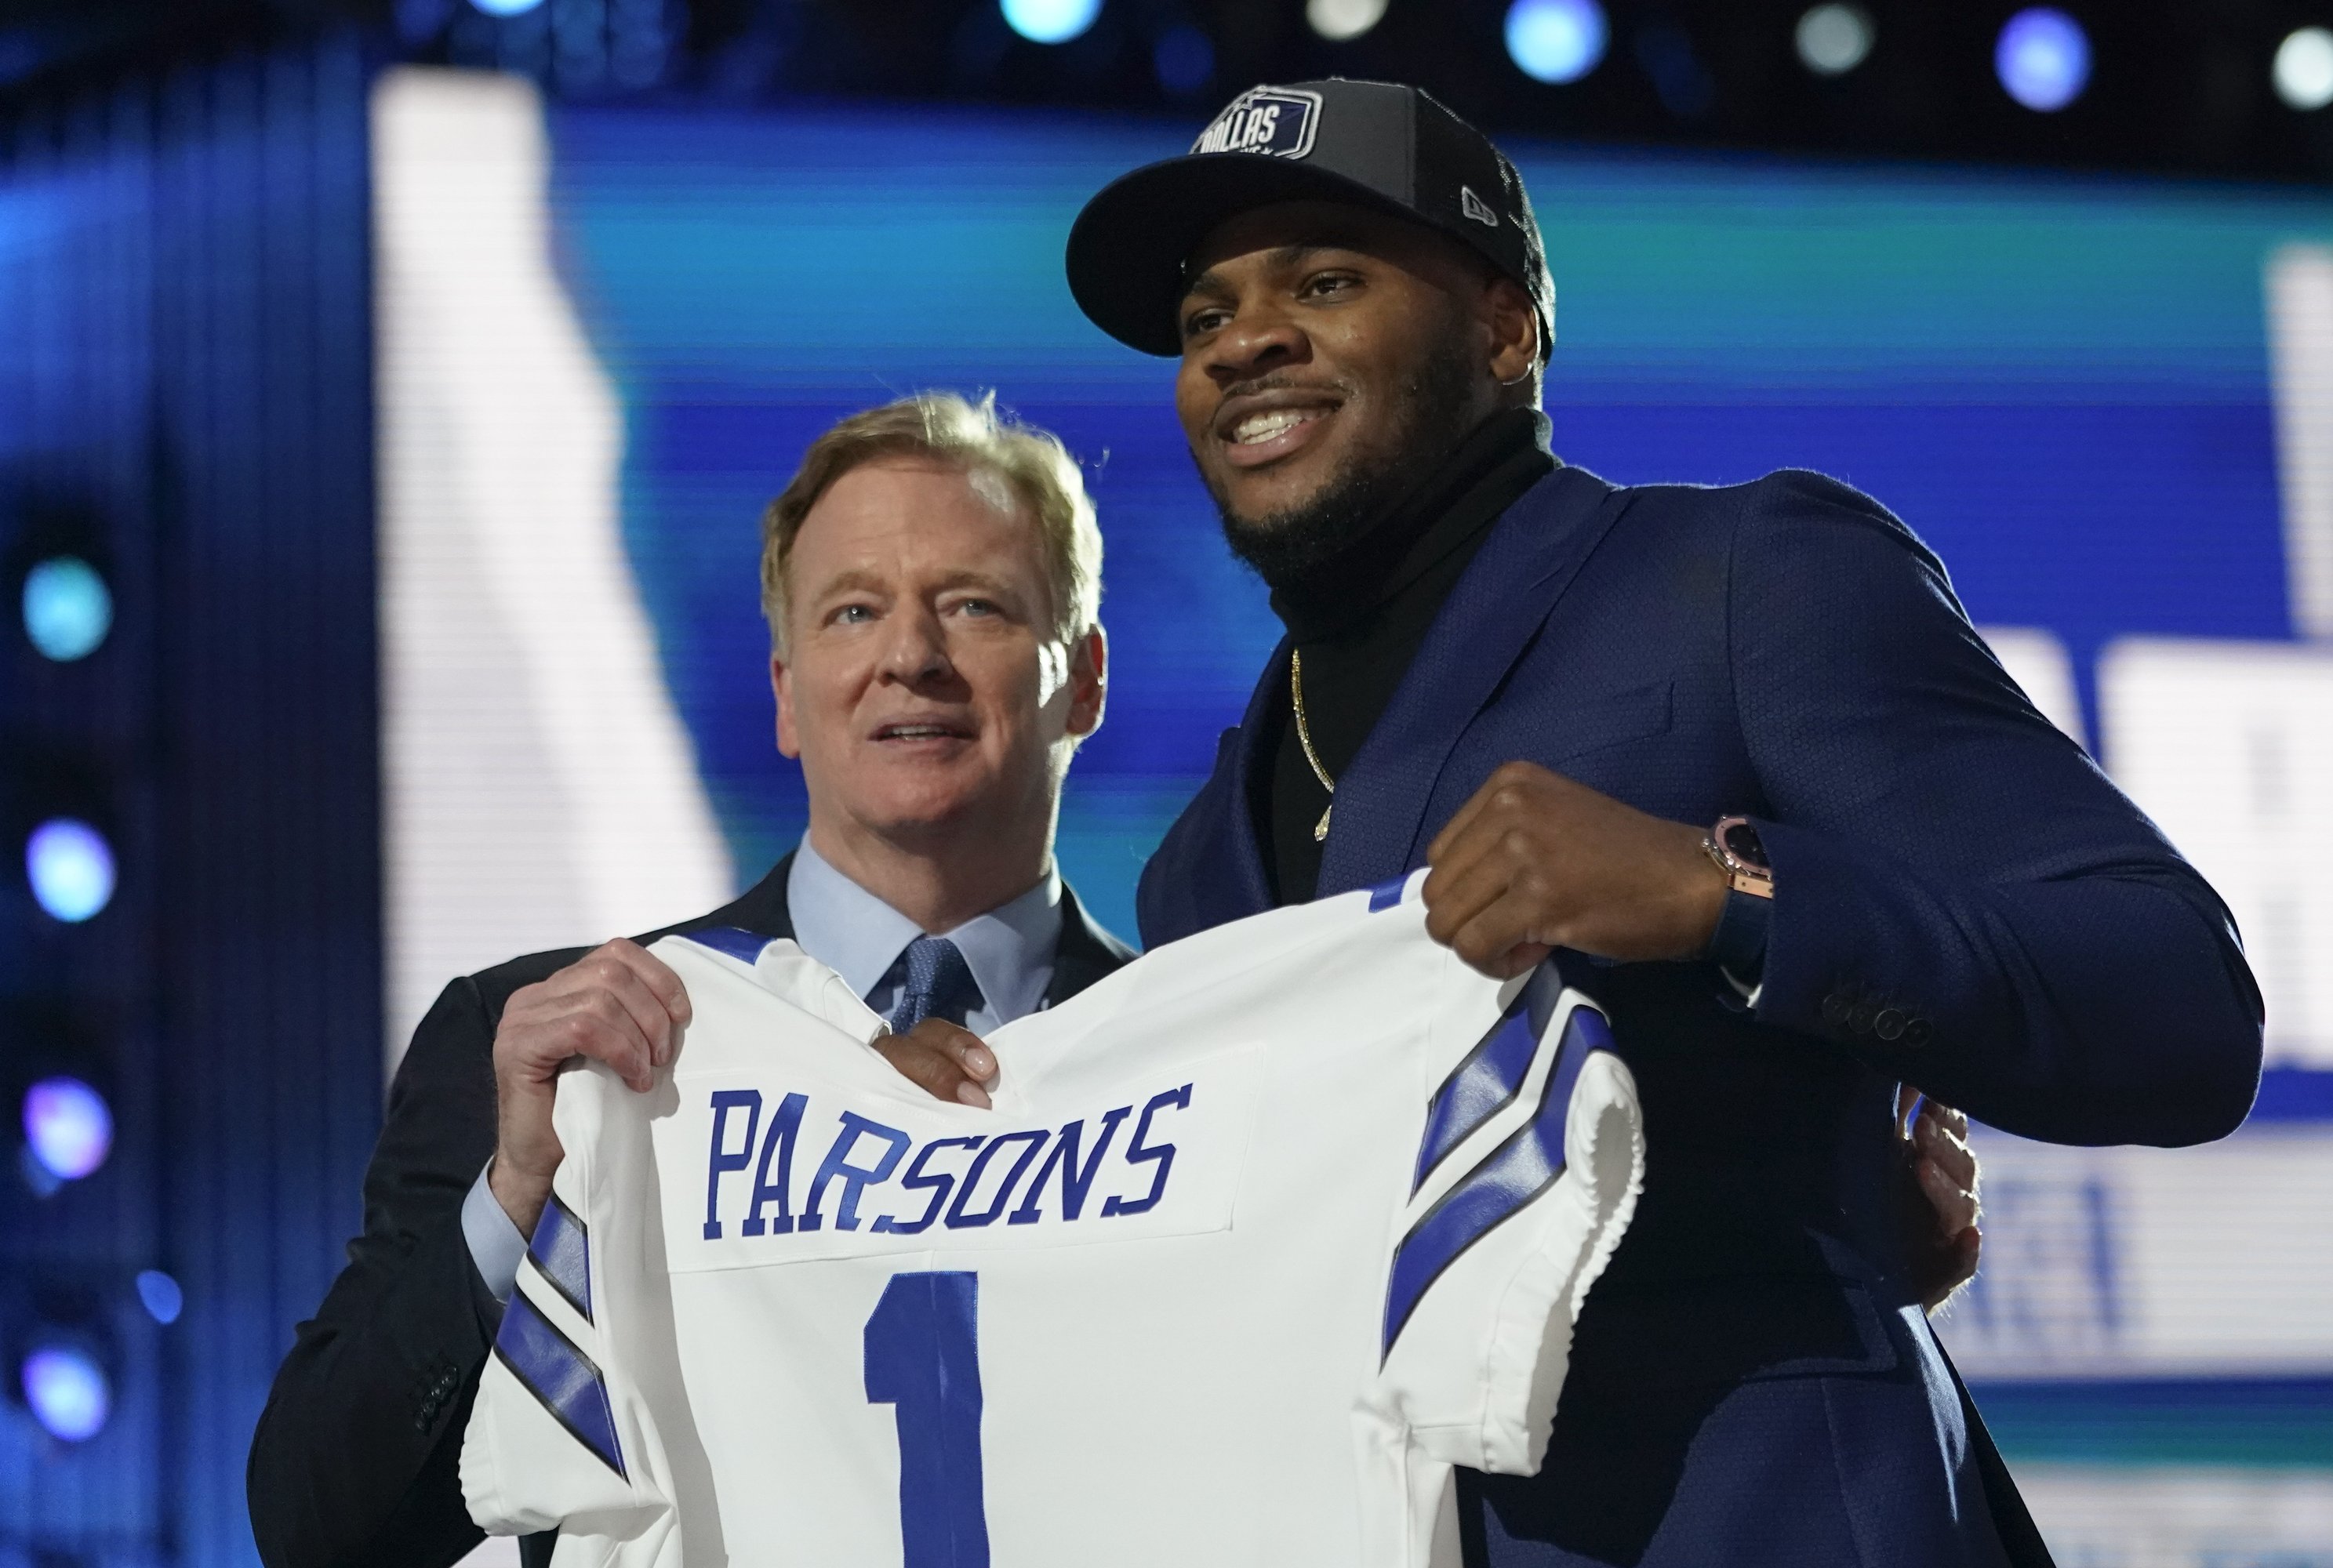 NFL Draft 2021 Results: Reviewing This Year's Best Picks